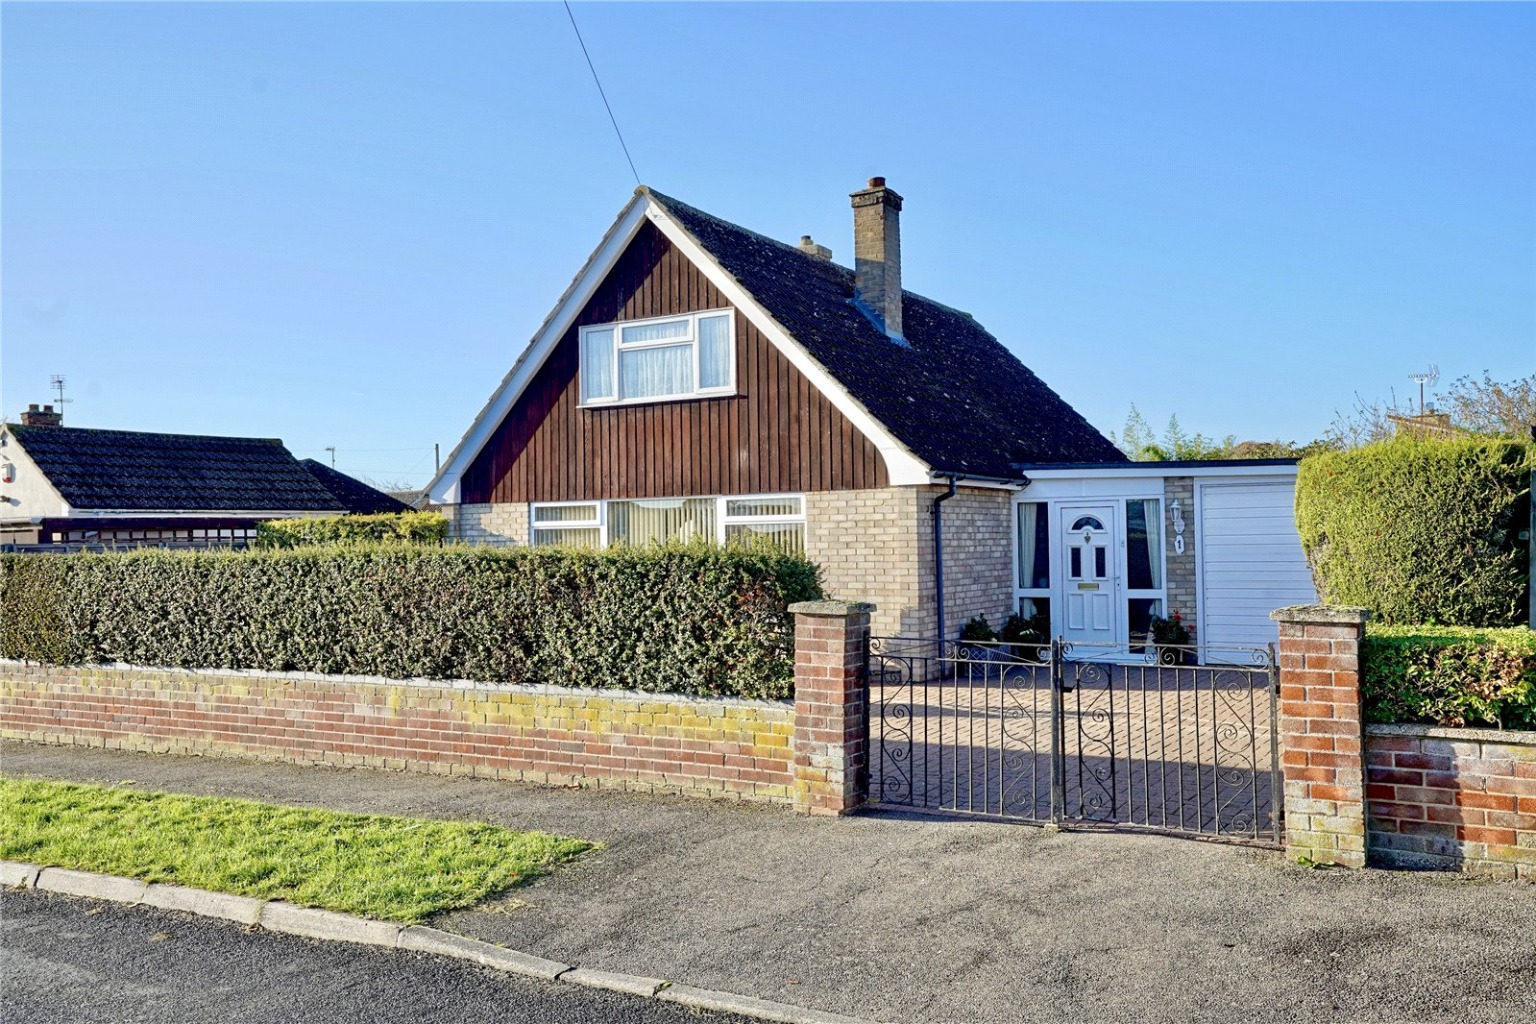 3 bed detached house for sale in Cedar Road, St. Ives - Property Image 1